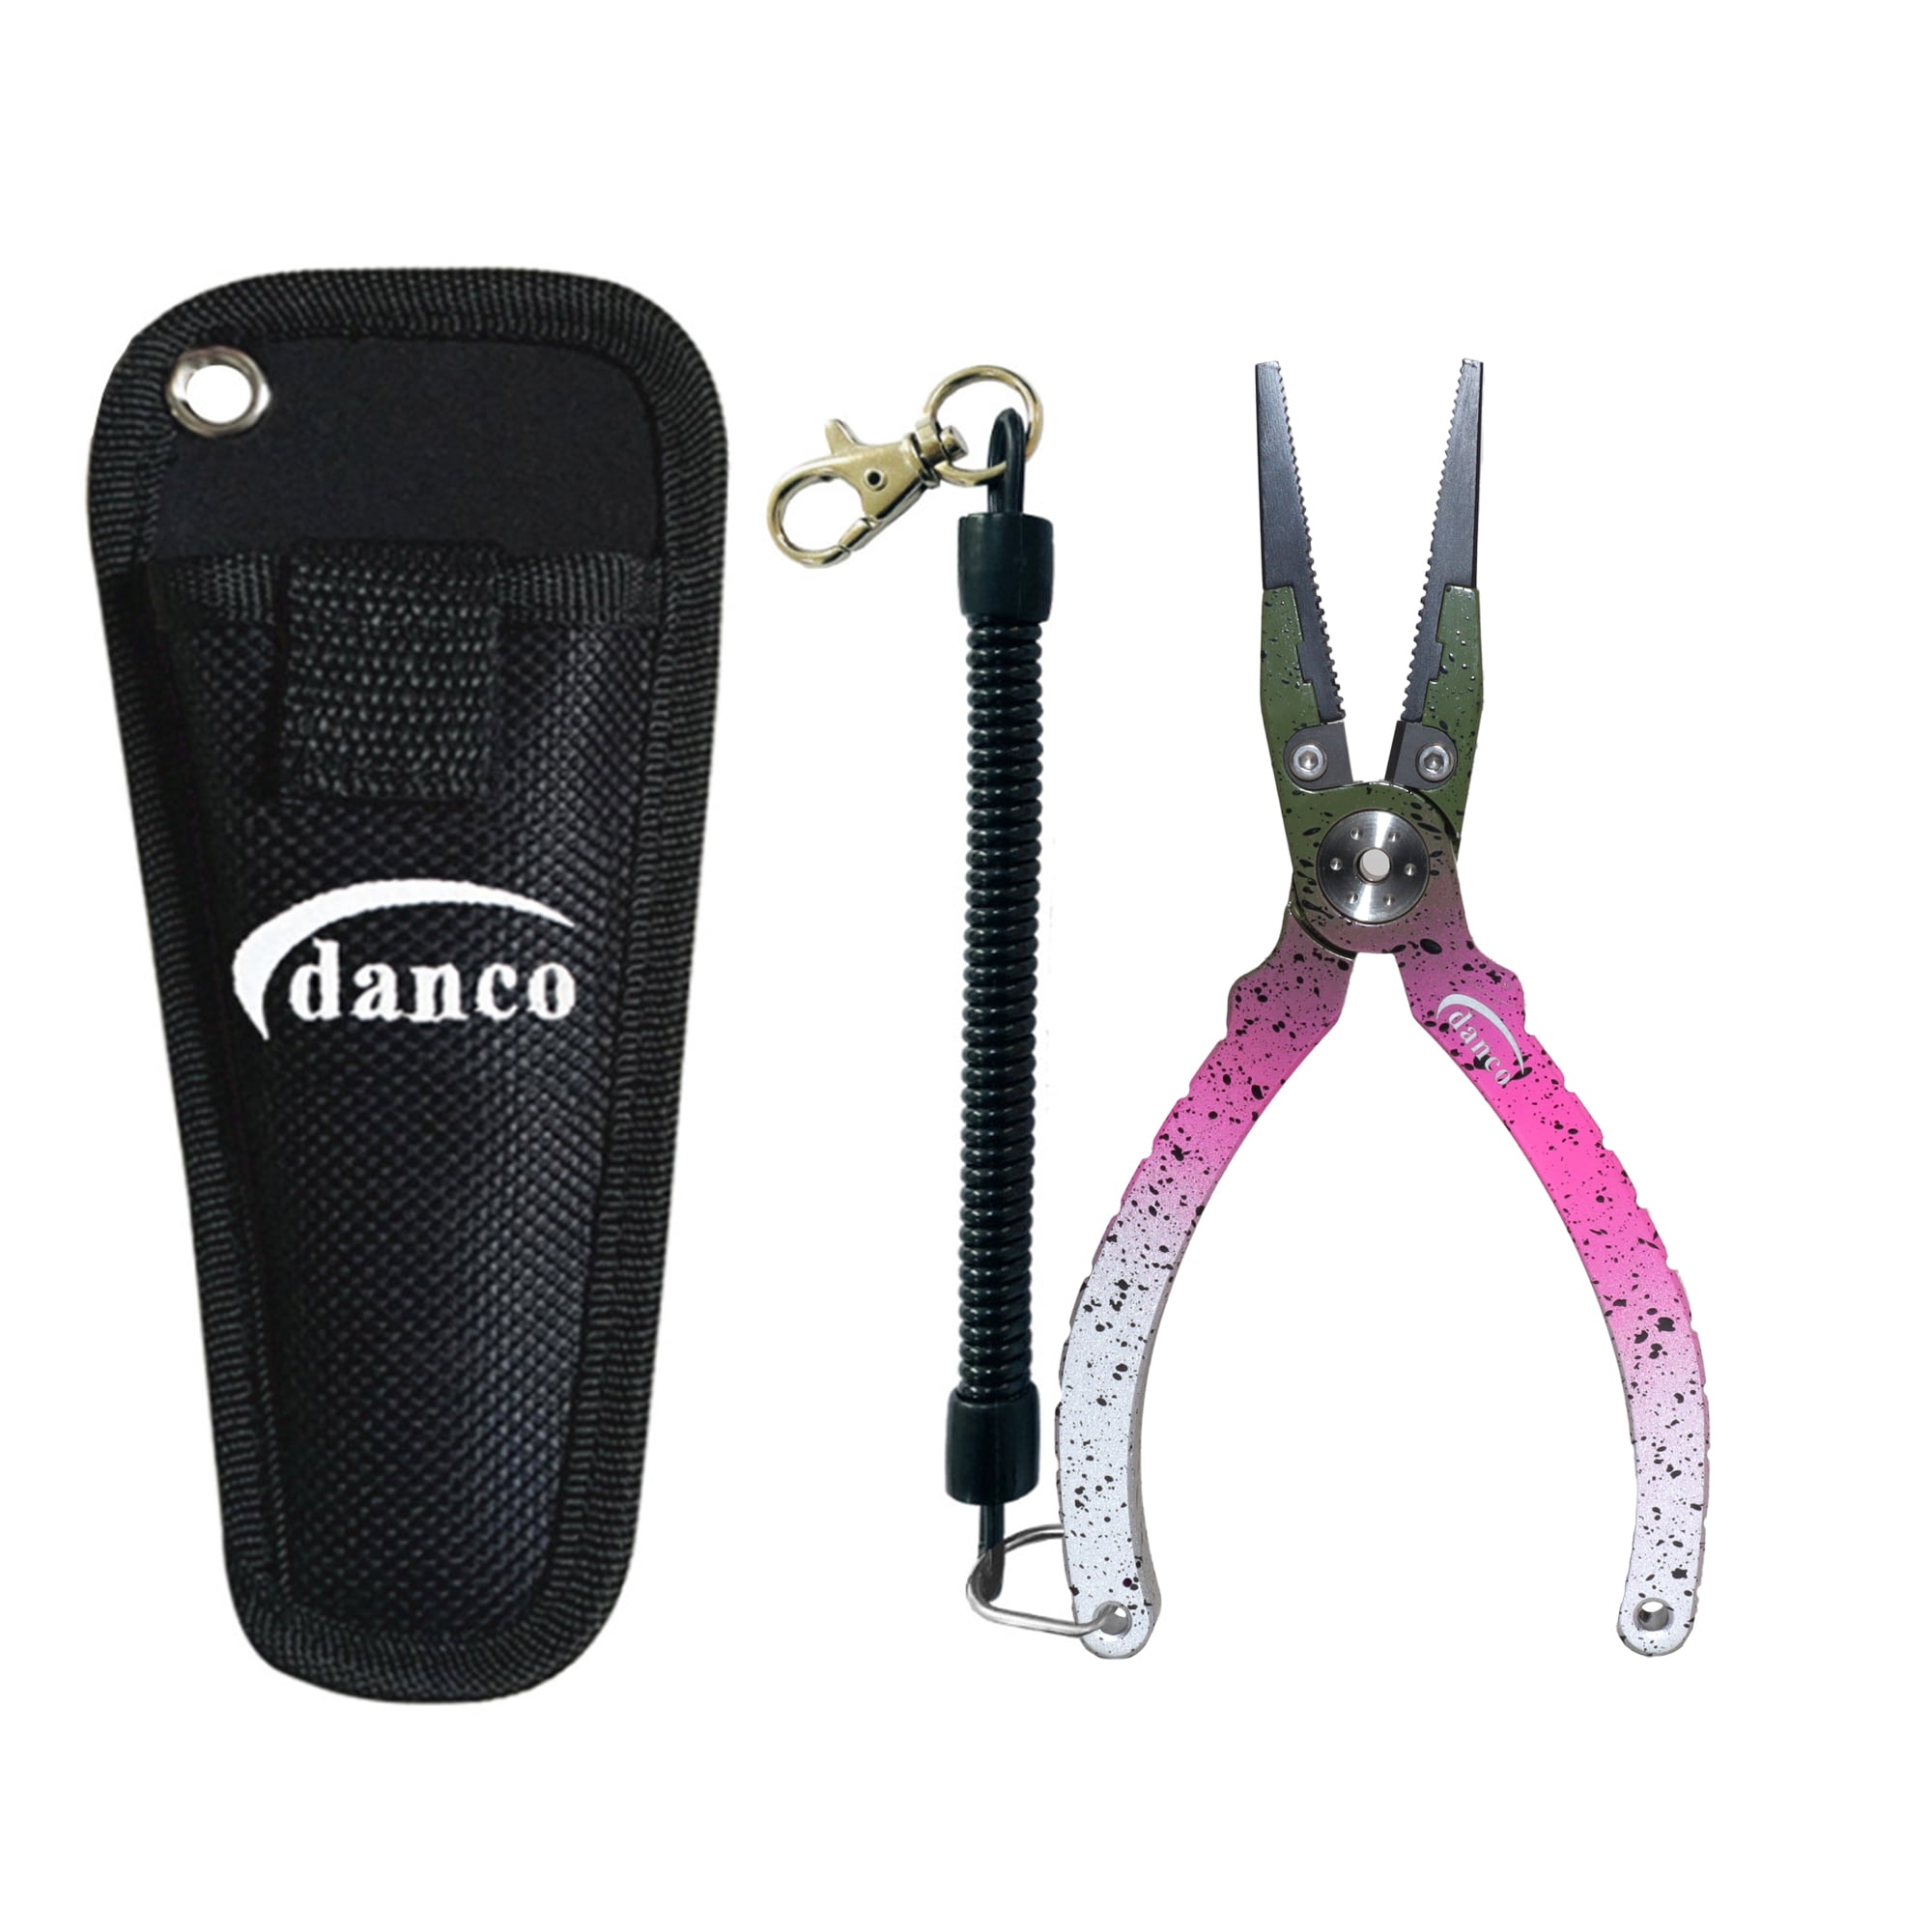 Danco Sports Fish Species Tournament Aluminum Pliers 6.5 inch Rainbow Trout Pink and White